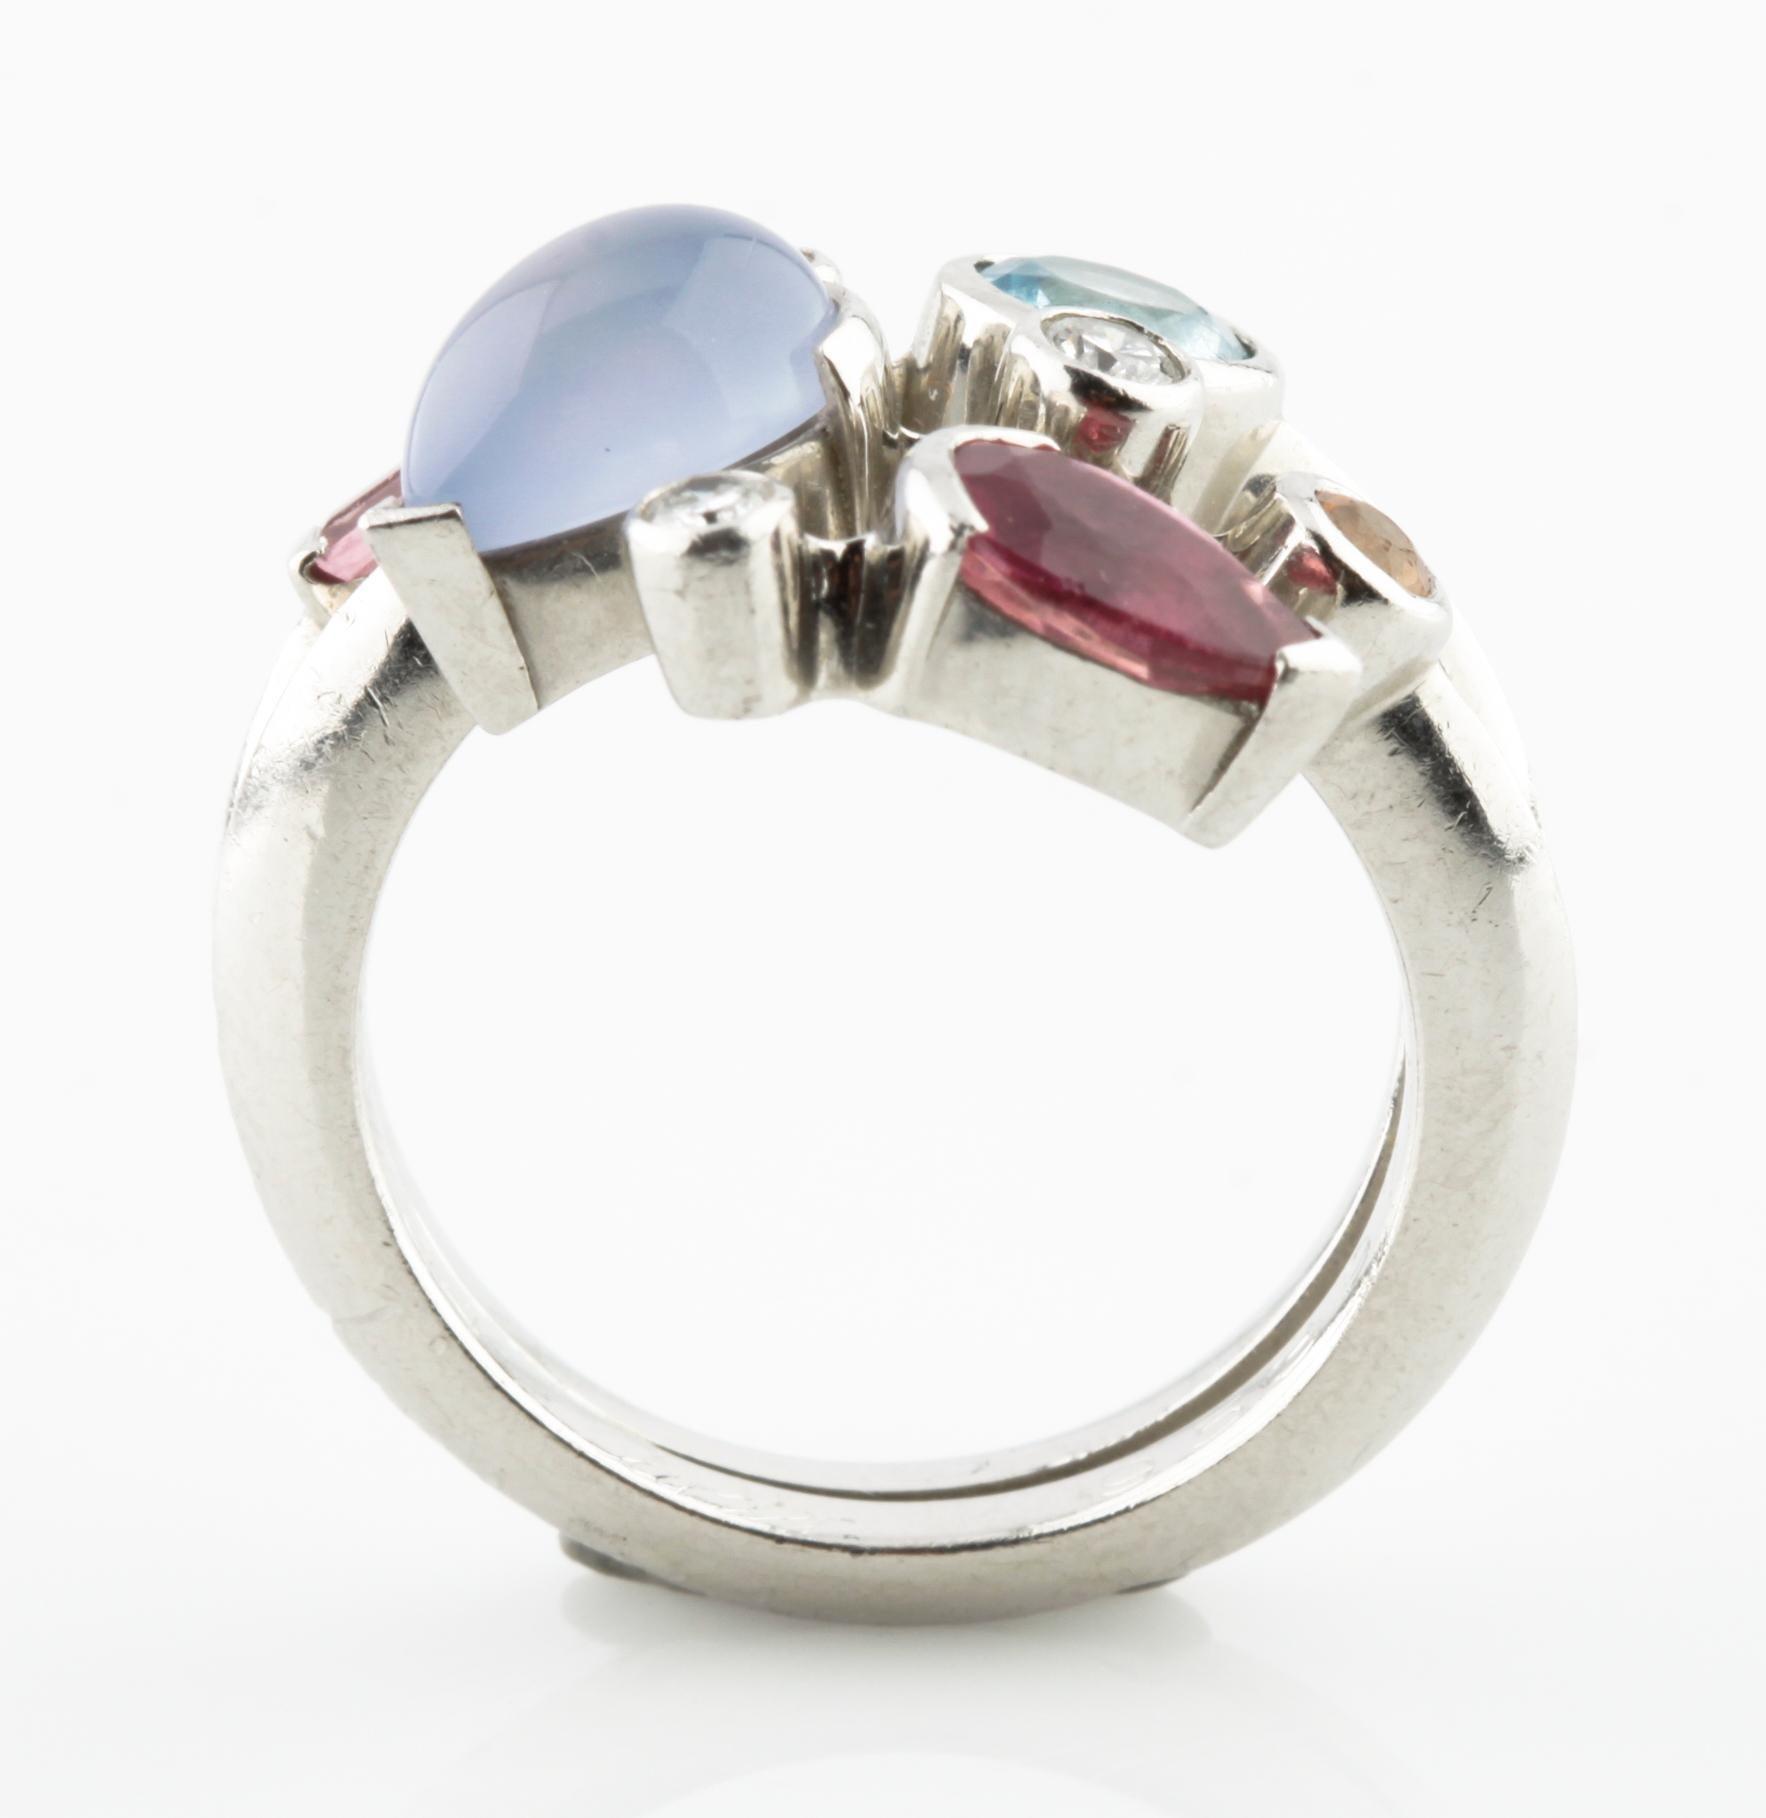 Gorgeous & Unique Cartier Ring. The Meli Melo design features variously polished and faceted gemstones bezel-set in 950 platinum.
The design incorporates aquamarine, pink tourmaline, chalcedony, and mandarin garnet with brilliant-cut diamond